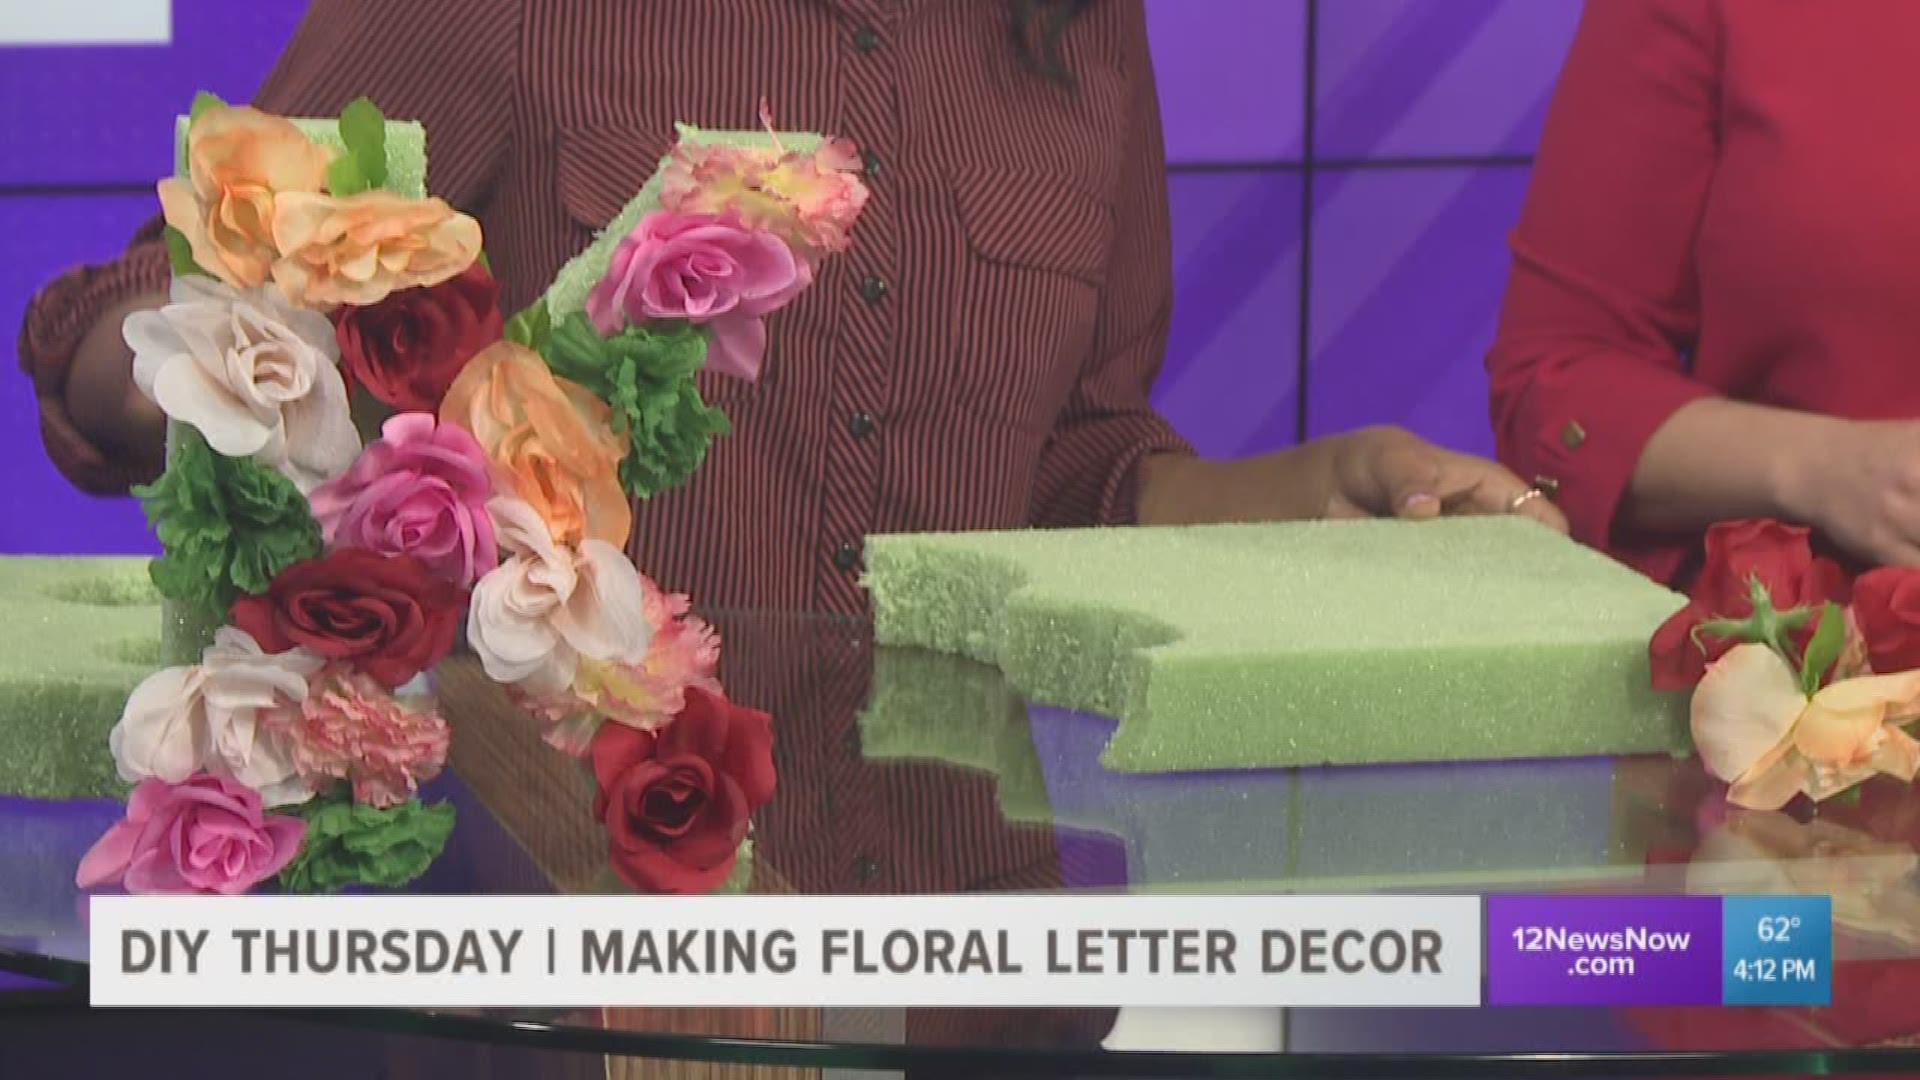 Make this creative project for yourself or others. Follow along with Kierra and Lauren to spice up your decor.